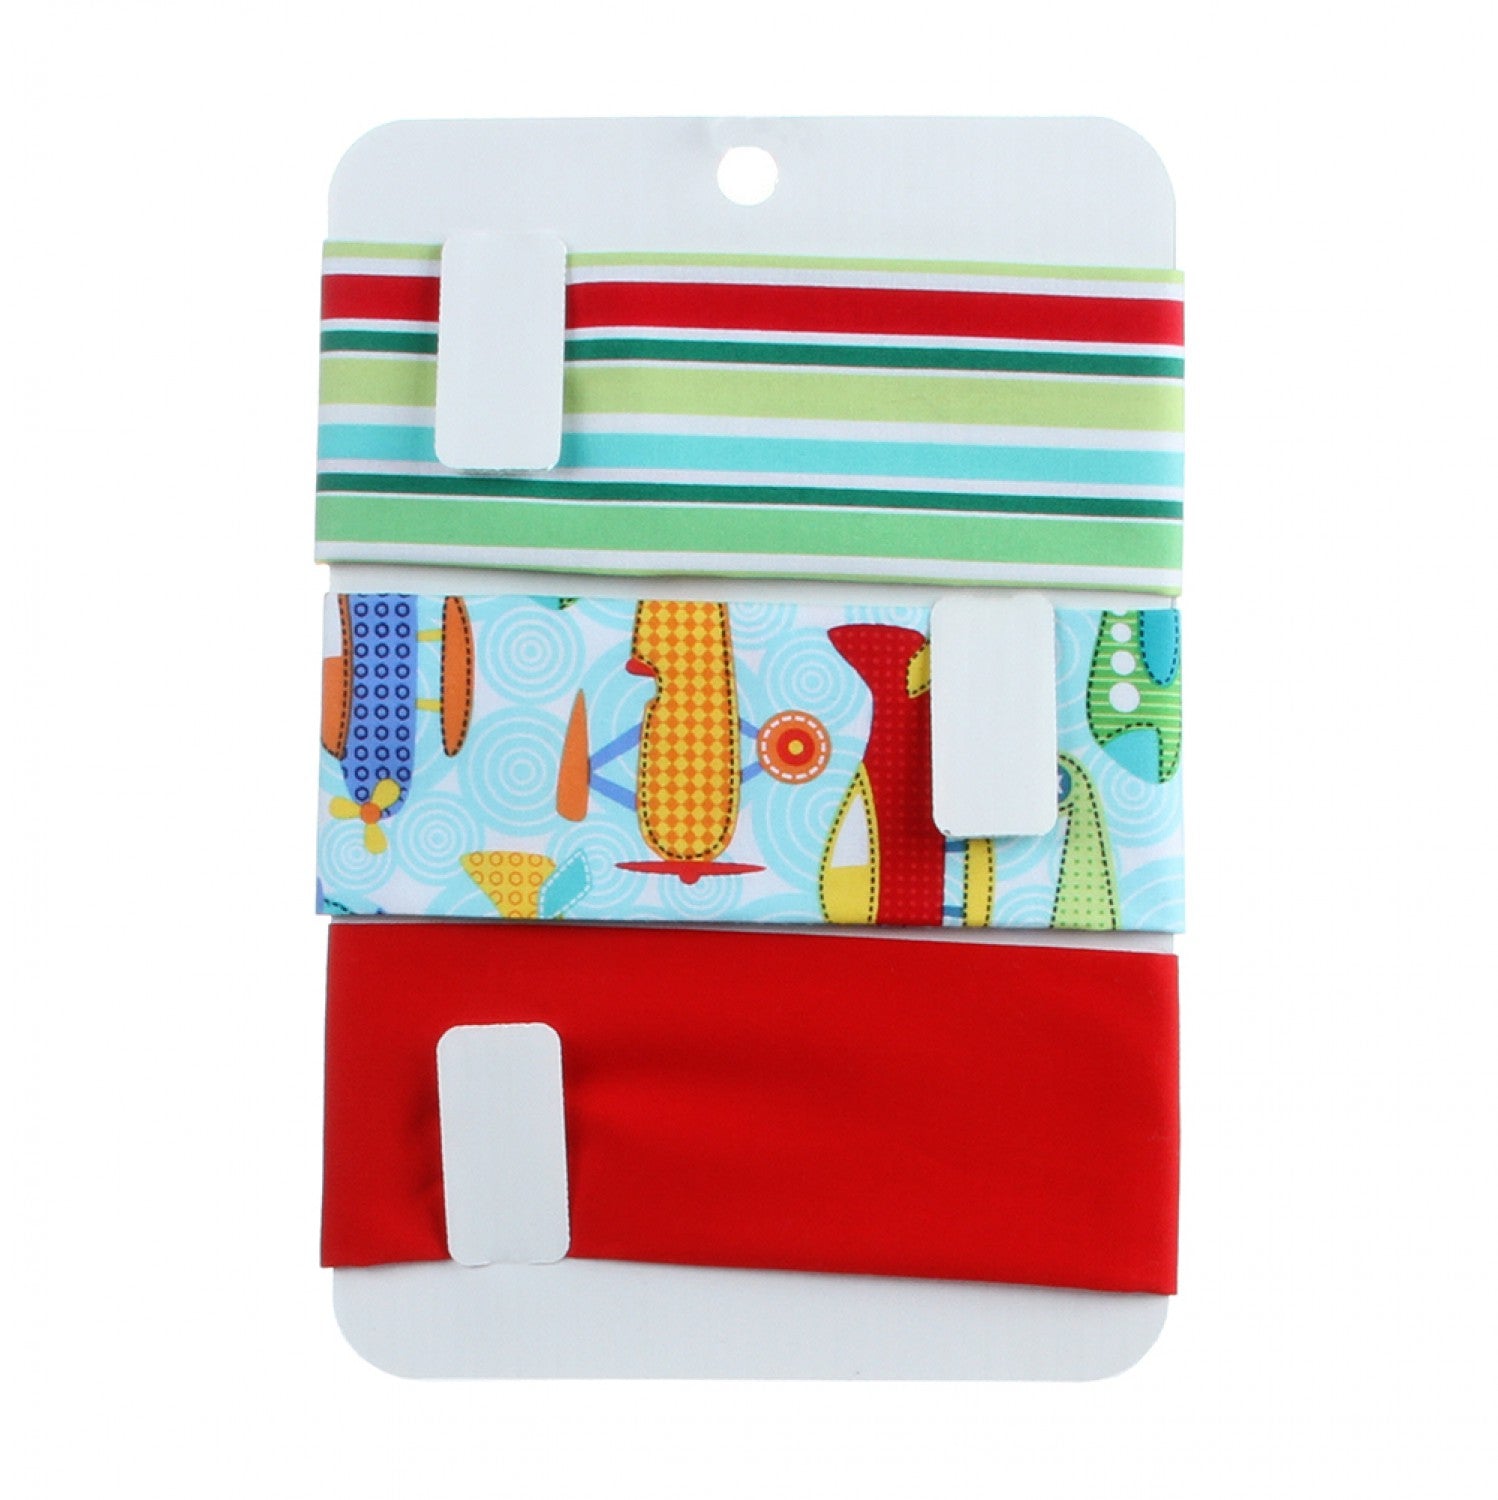 Fabric Organizer Shorty 10.5 x 7 - Pack of 6